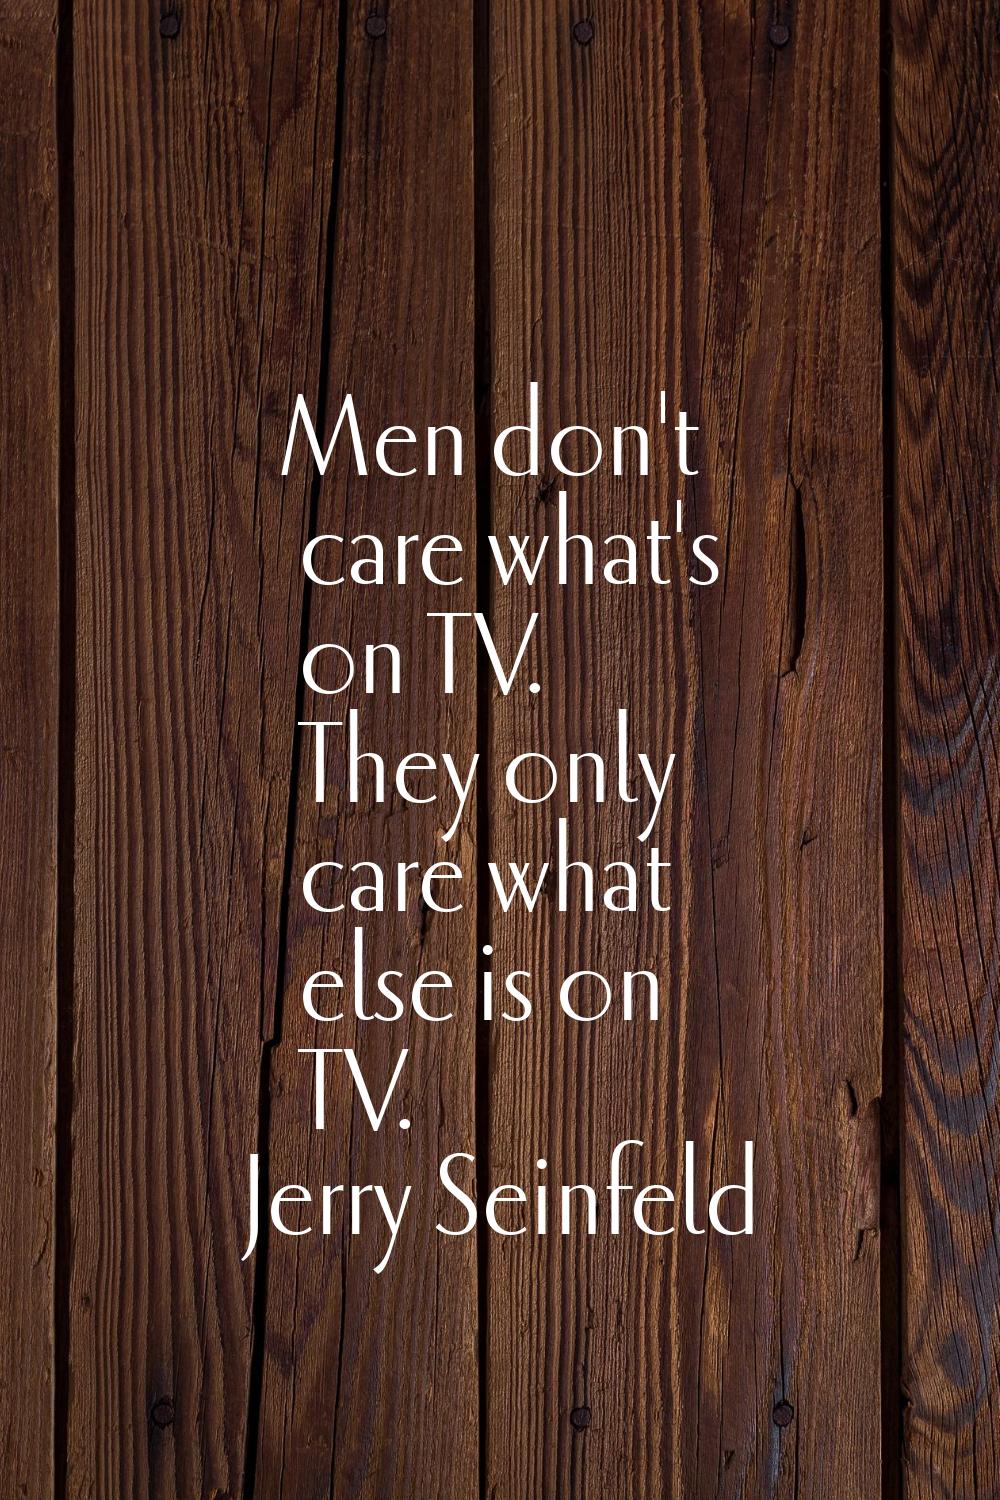 Men don't care what's on TV. They only care what else is on TV.